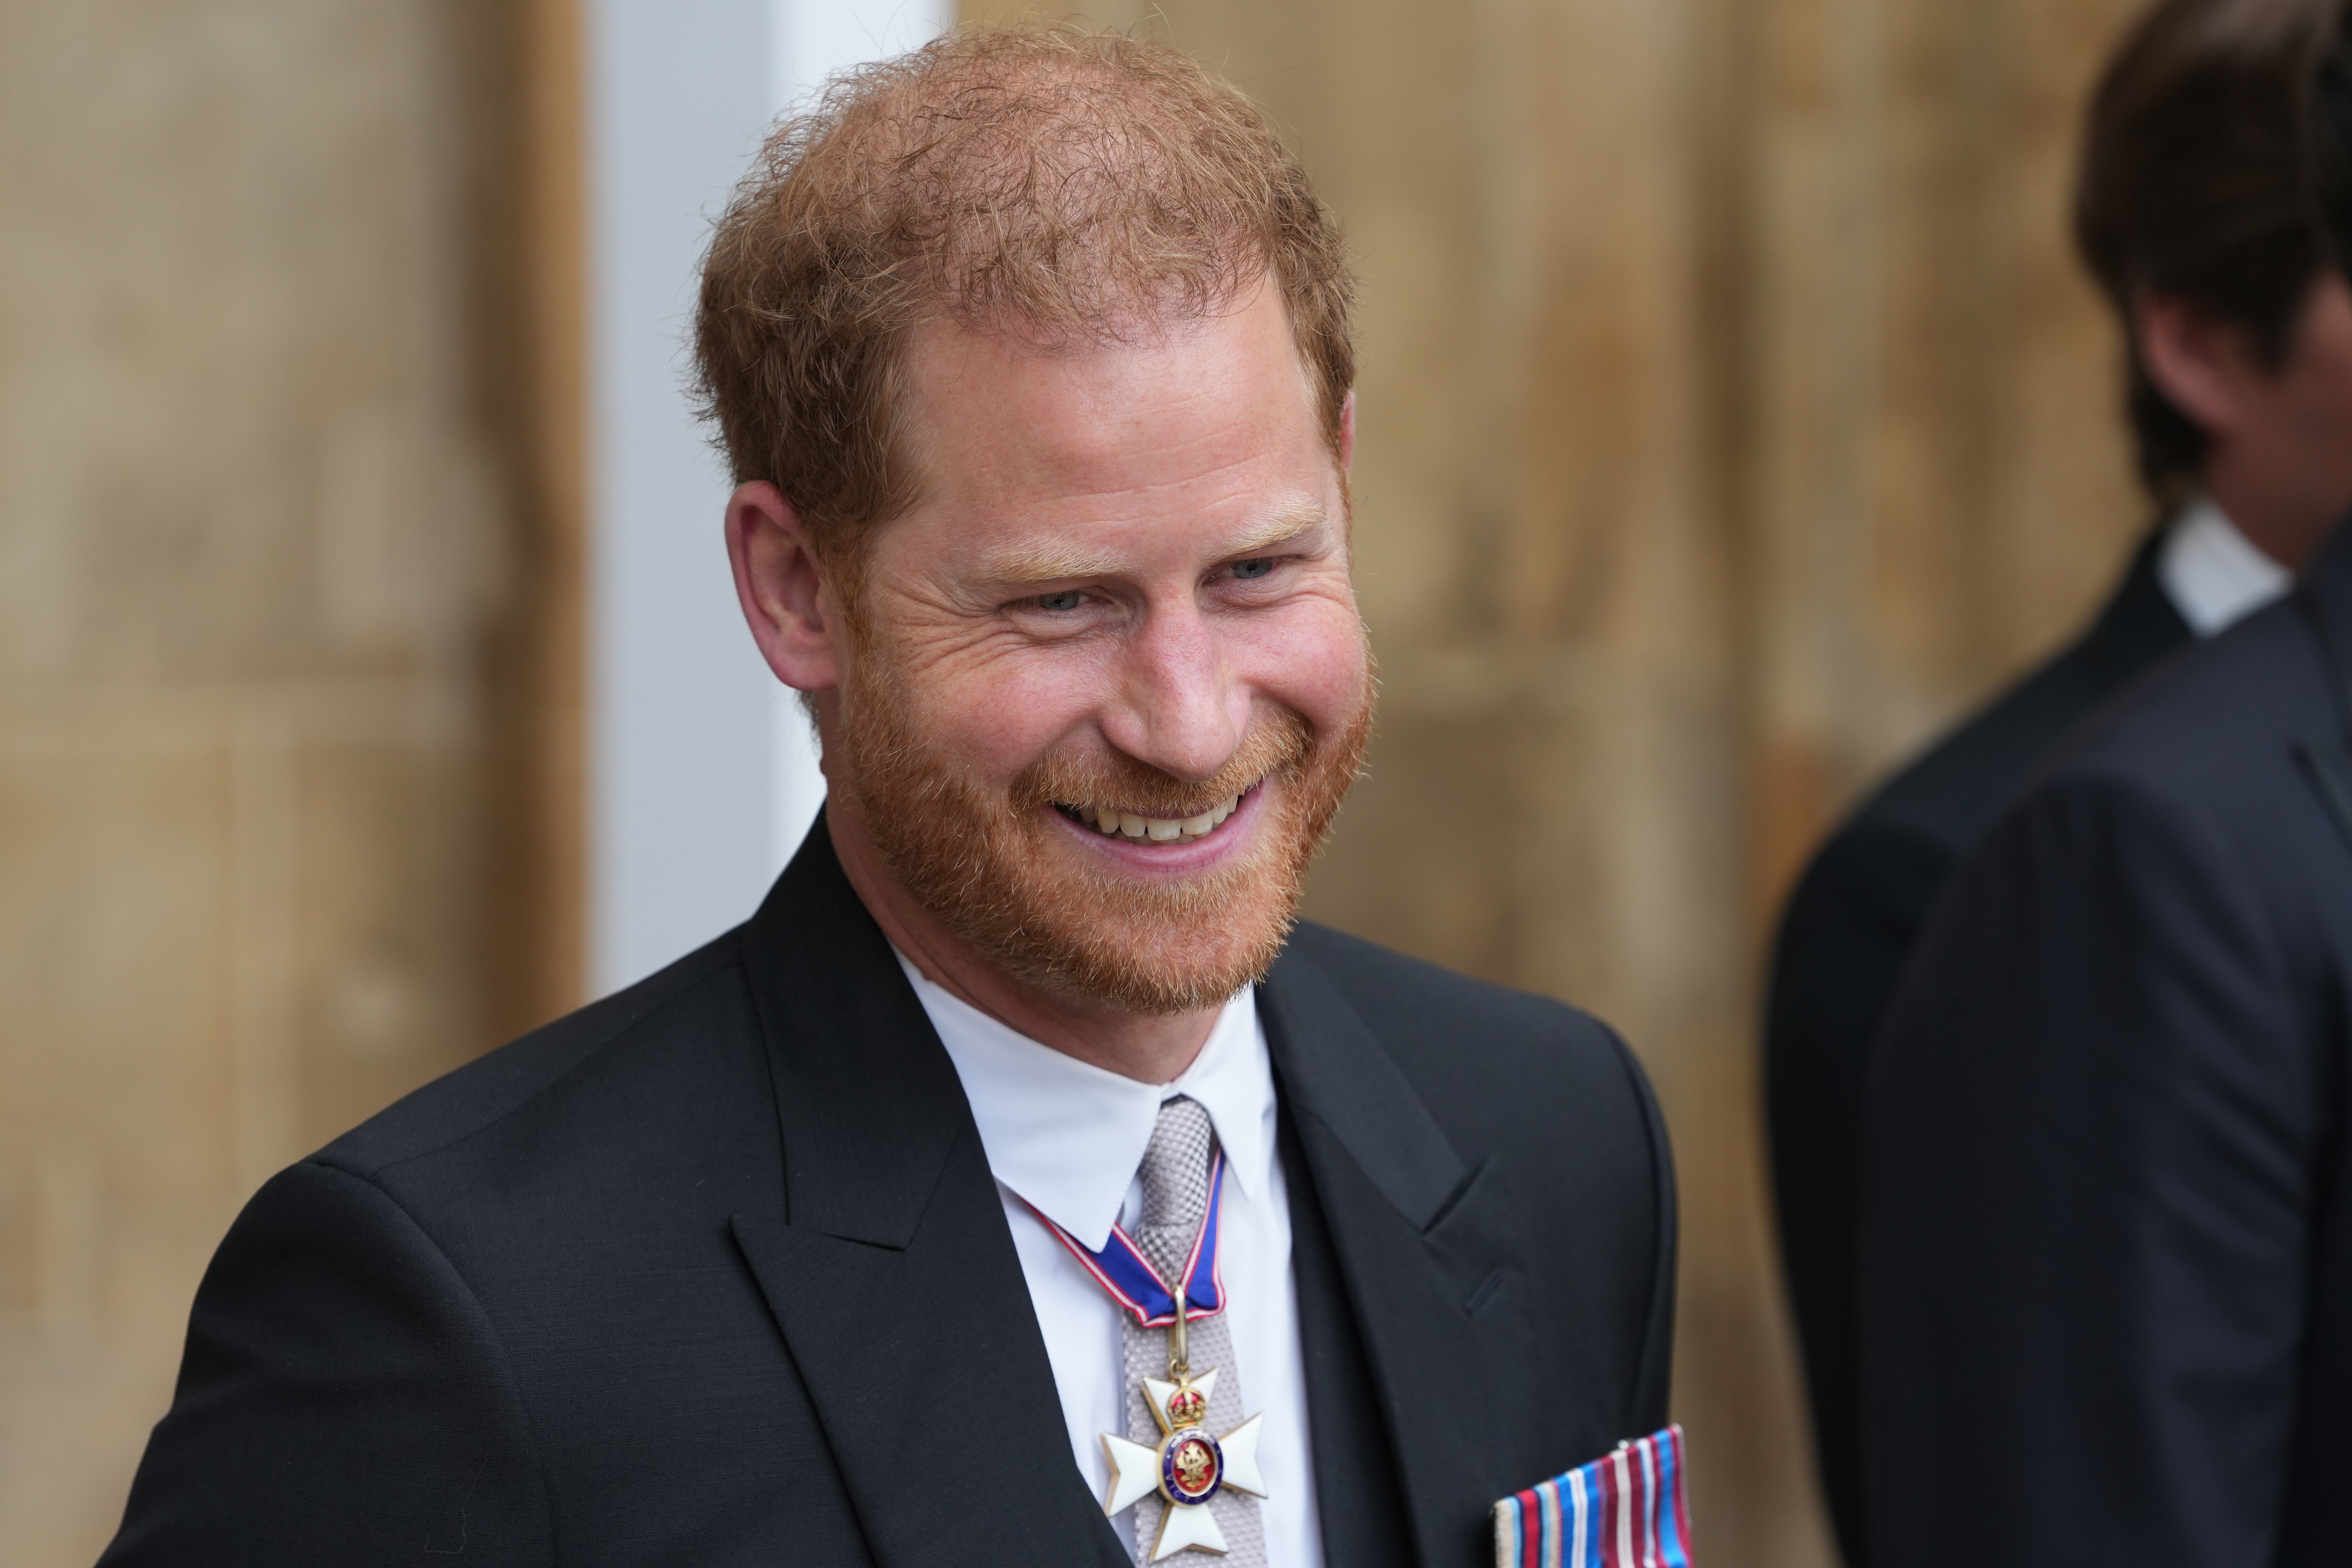 Judge ‘surprised’ after Prince Harry a no-show in court on 1st day of U.K. tabloid case